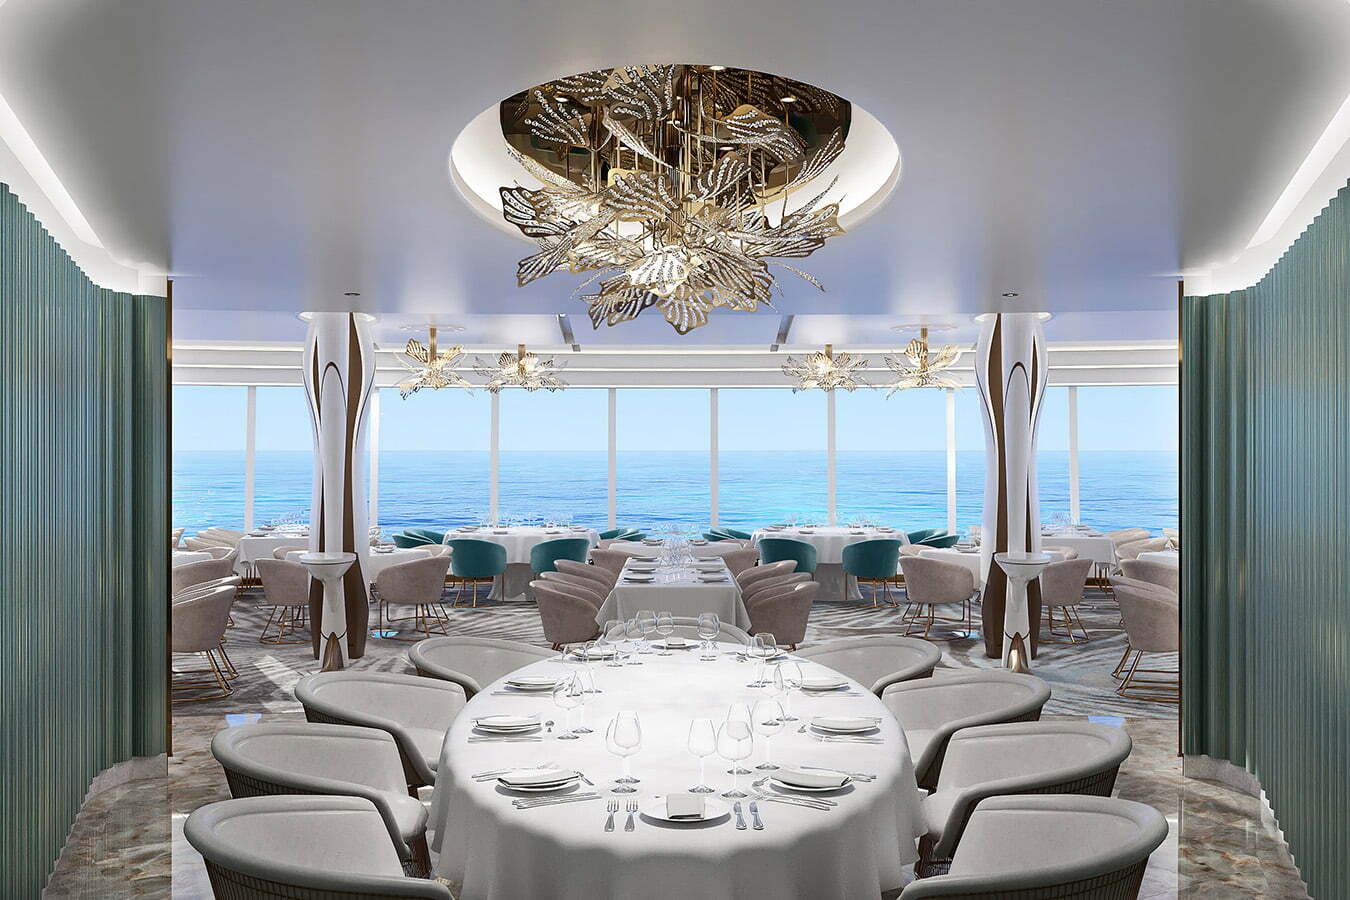 Norwegian Cruise Line’s new Prima Class ships, Norwegian Prima and Viva, will feature Hudson’s, the new main dining room located in the aft of the ship where guests will be able to take in stunning 270-degree views overlooking the stern